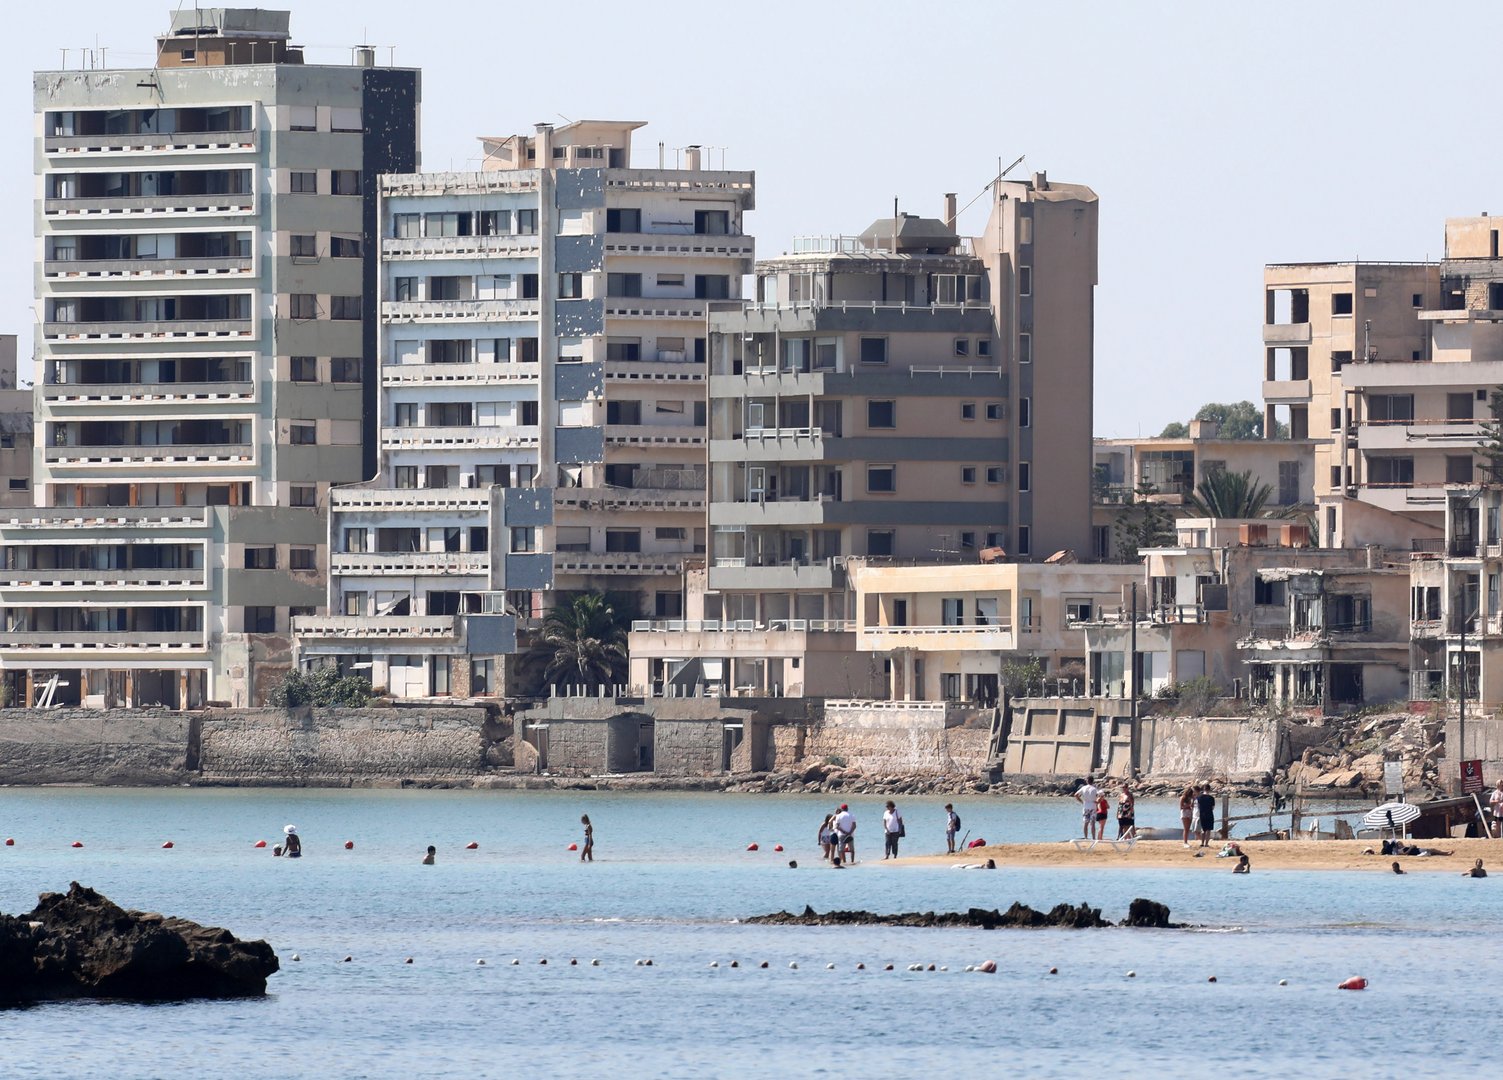 image Varosha hotel sales could just be the start